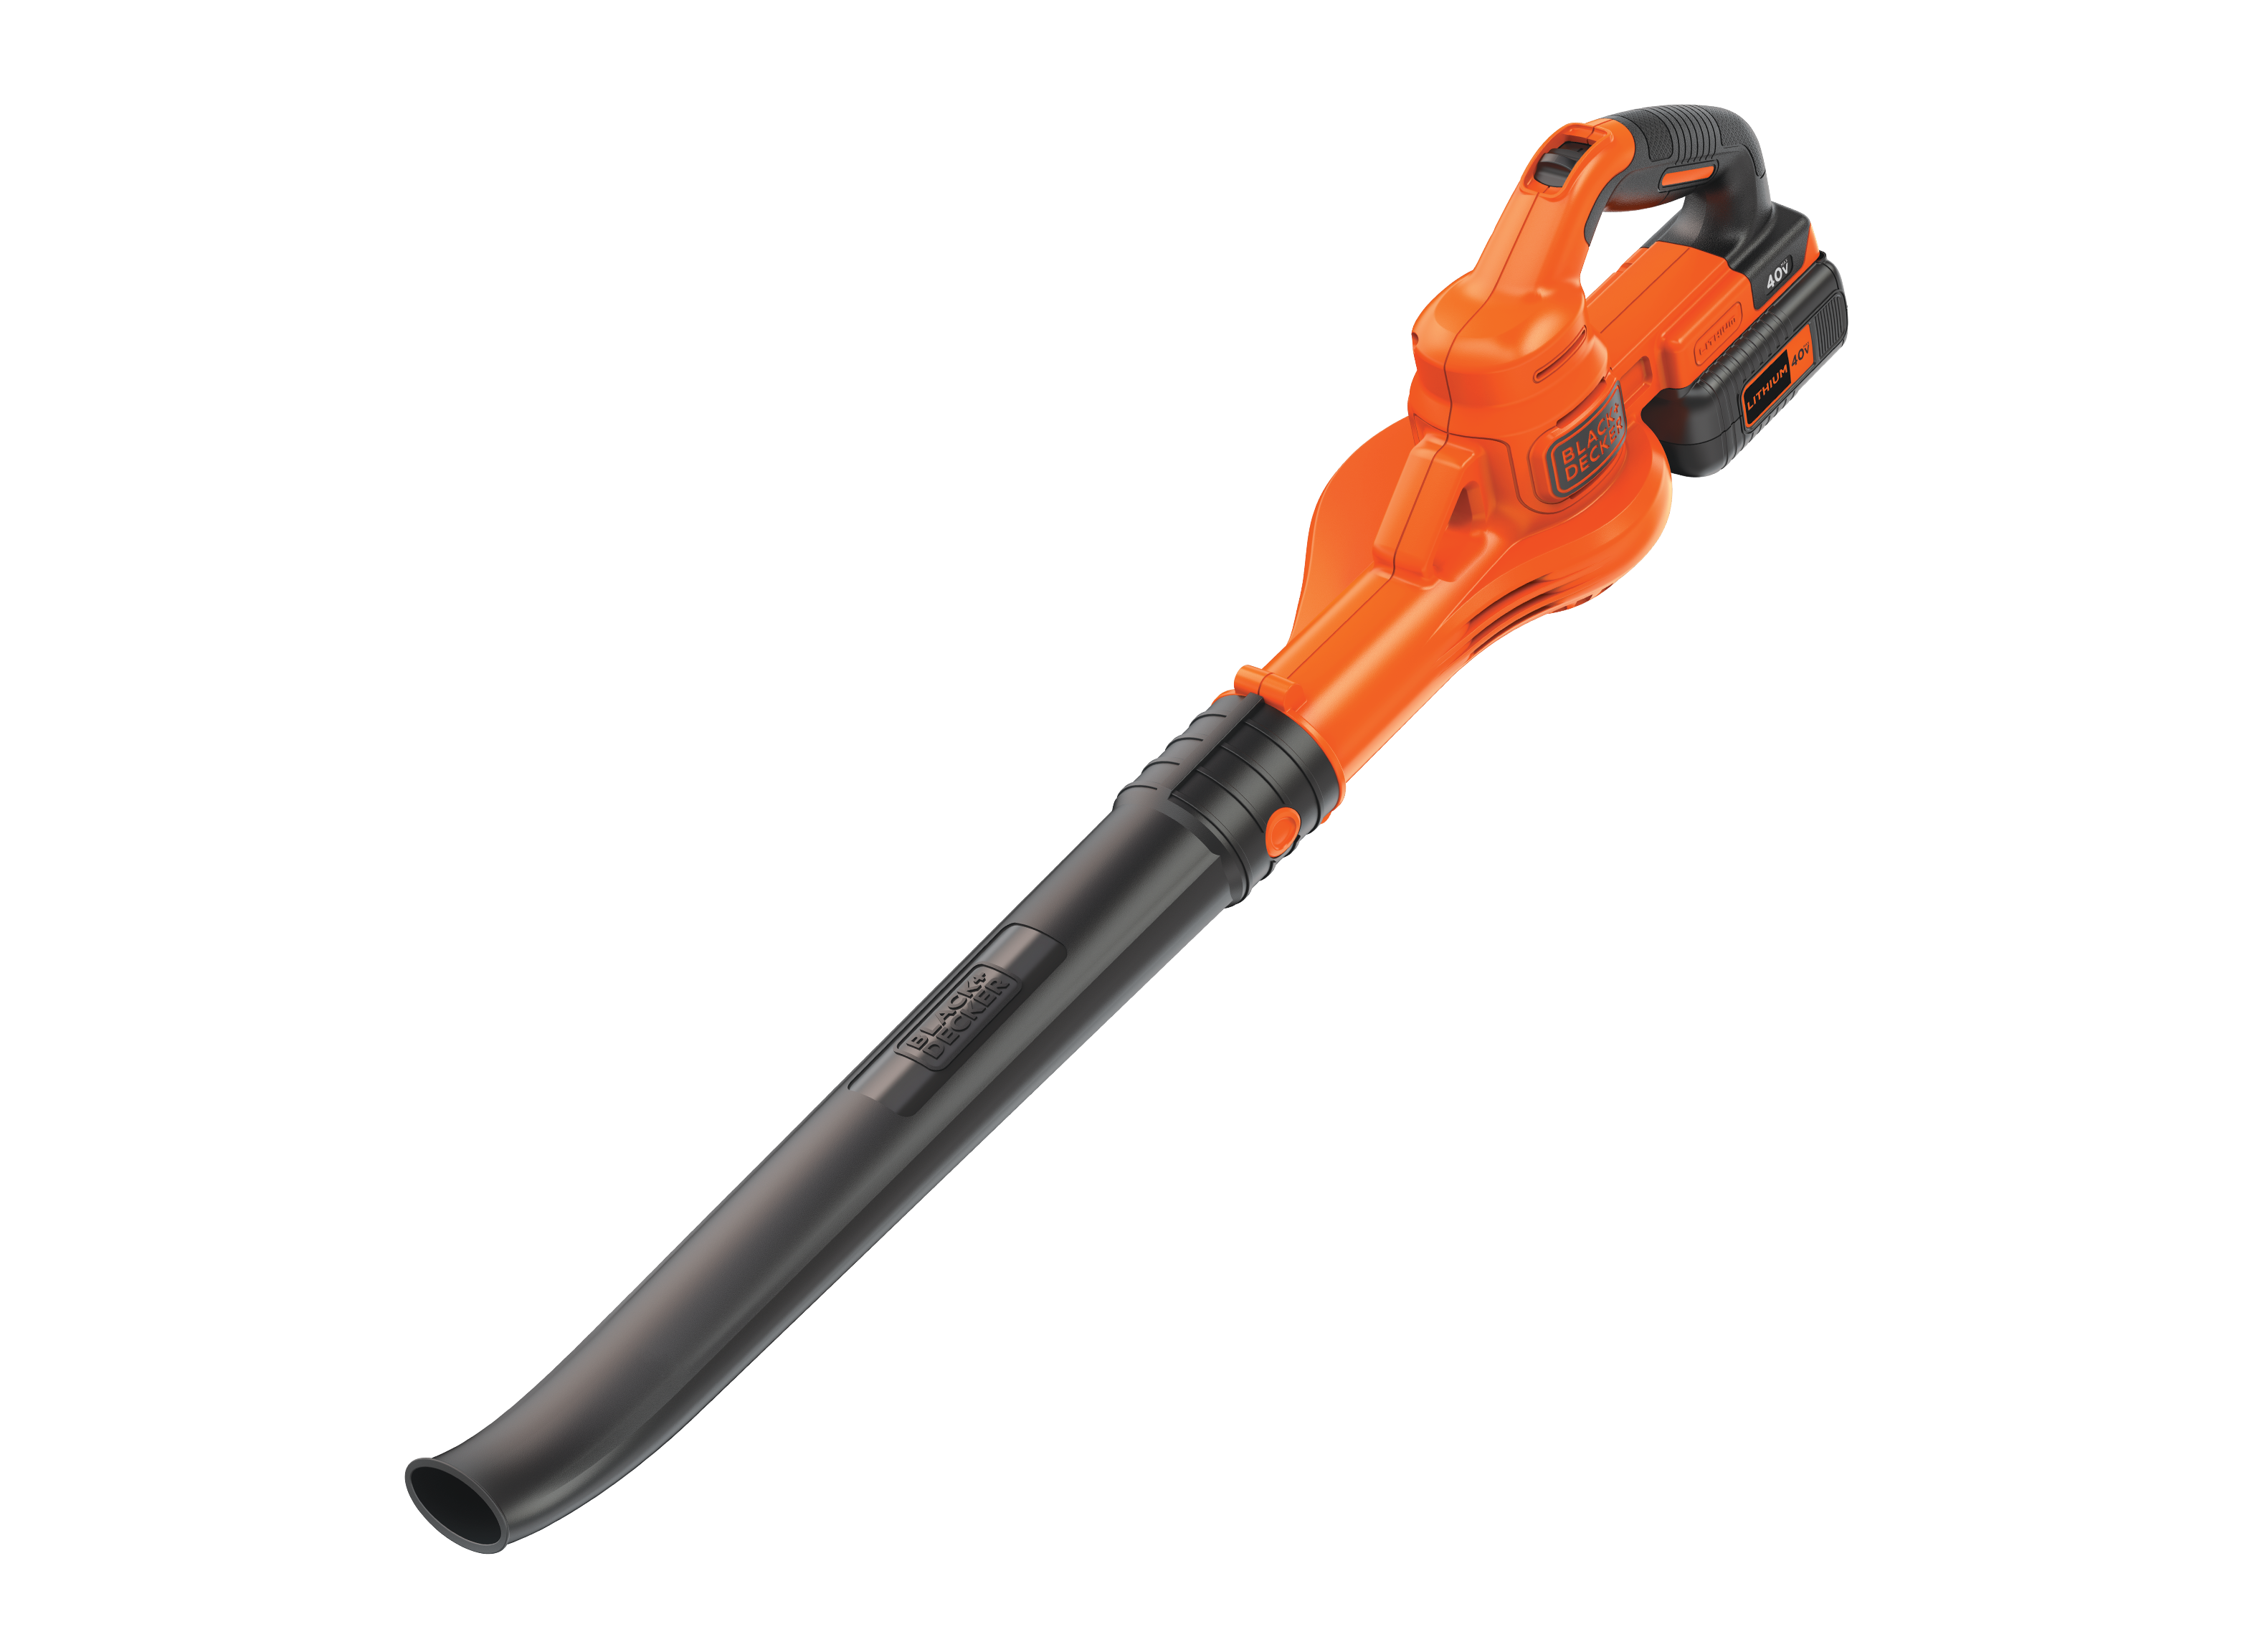 https://crdms.images.consumerreports.org/prod/products/cr/models/407123-battery-handheld-blowers-black-decker-lsw40c-10030665.png